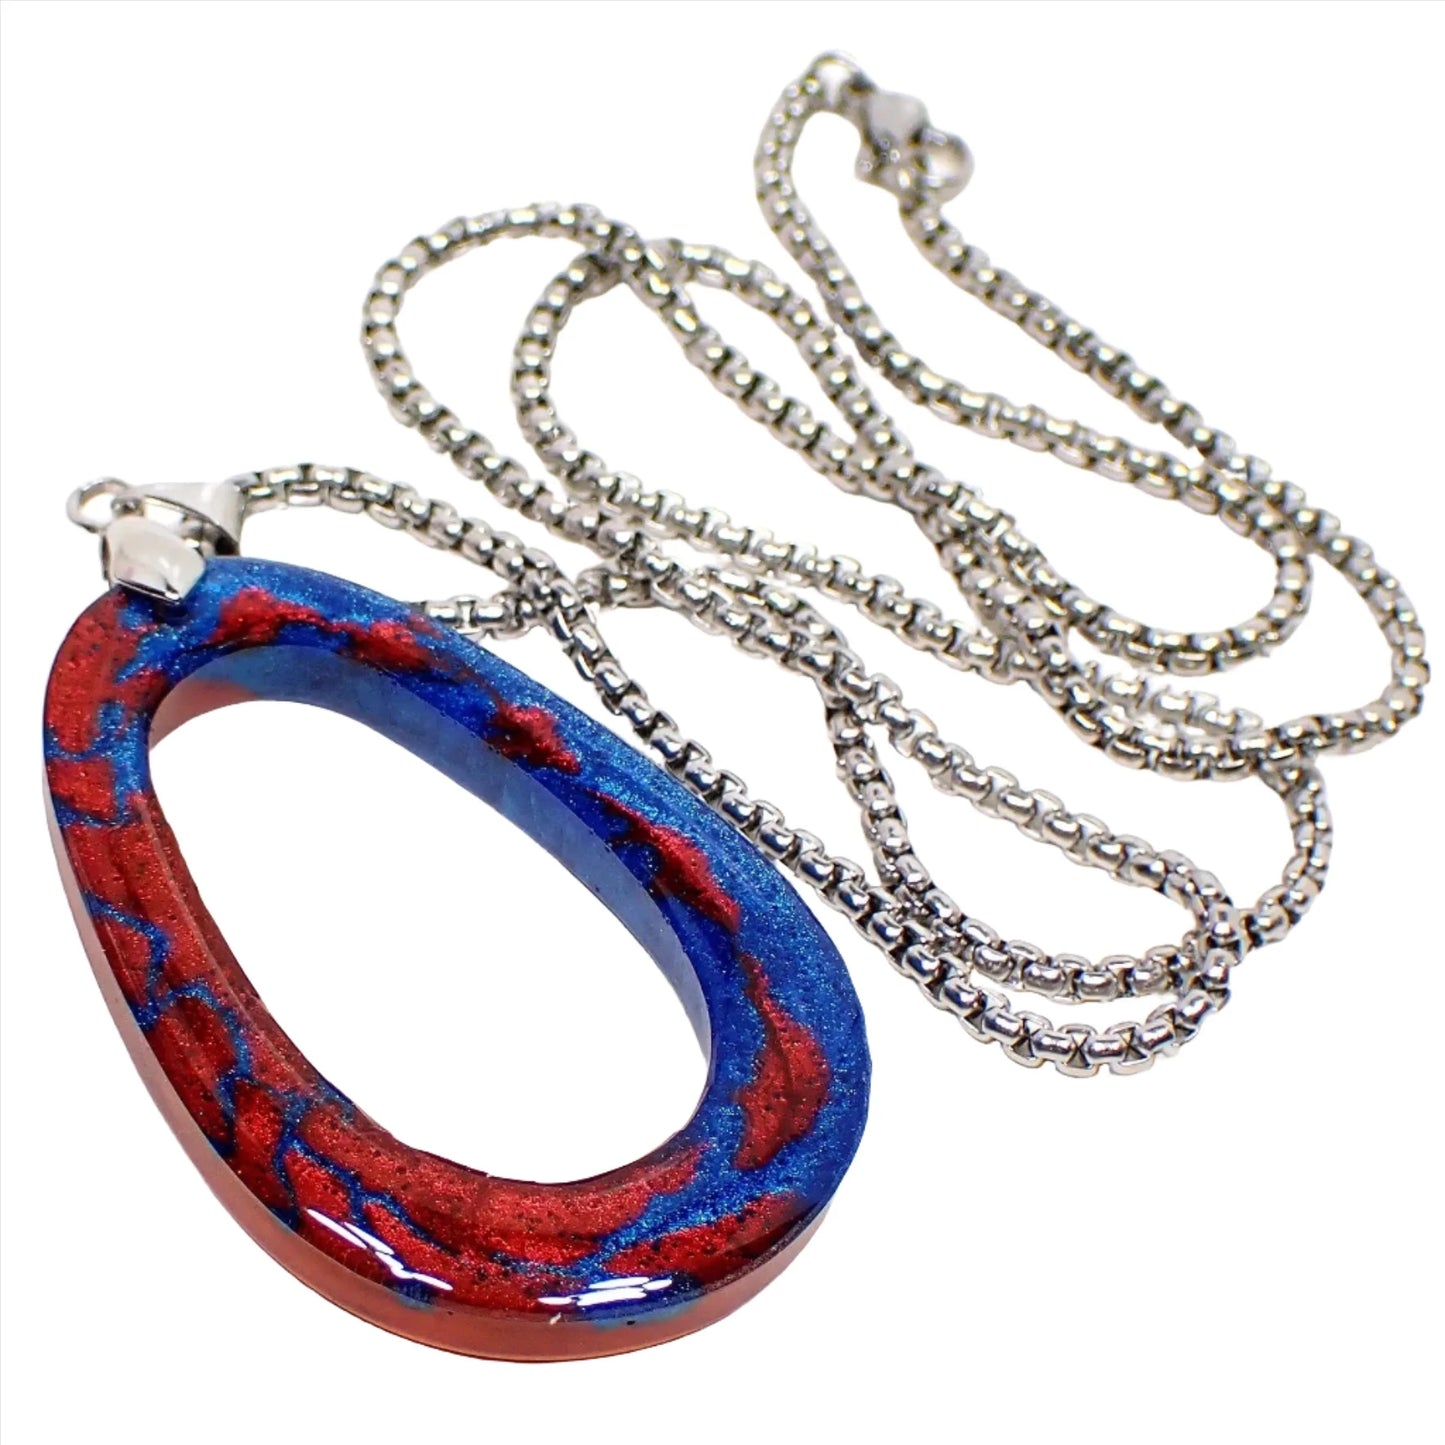 Angled enlarged view of the handmade resin pendant necklace. The metal is antiqued silver tone in color. The chain is box style with a lobster claw clasp. The resin pendant is an open oval shape with pearly metallic blue and red resin. Each side side of the front of the pendant has one of the main colors with small splashes of the other color throughout it.